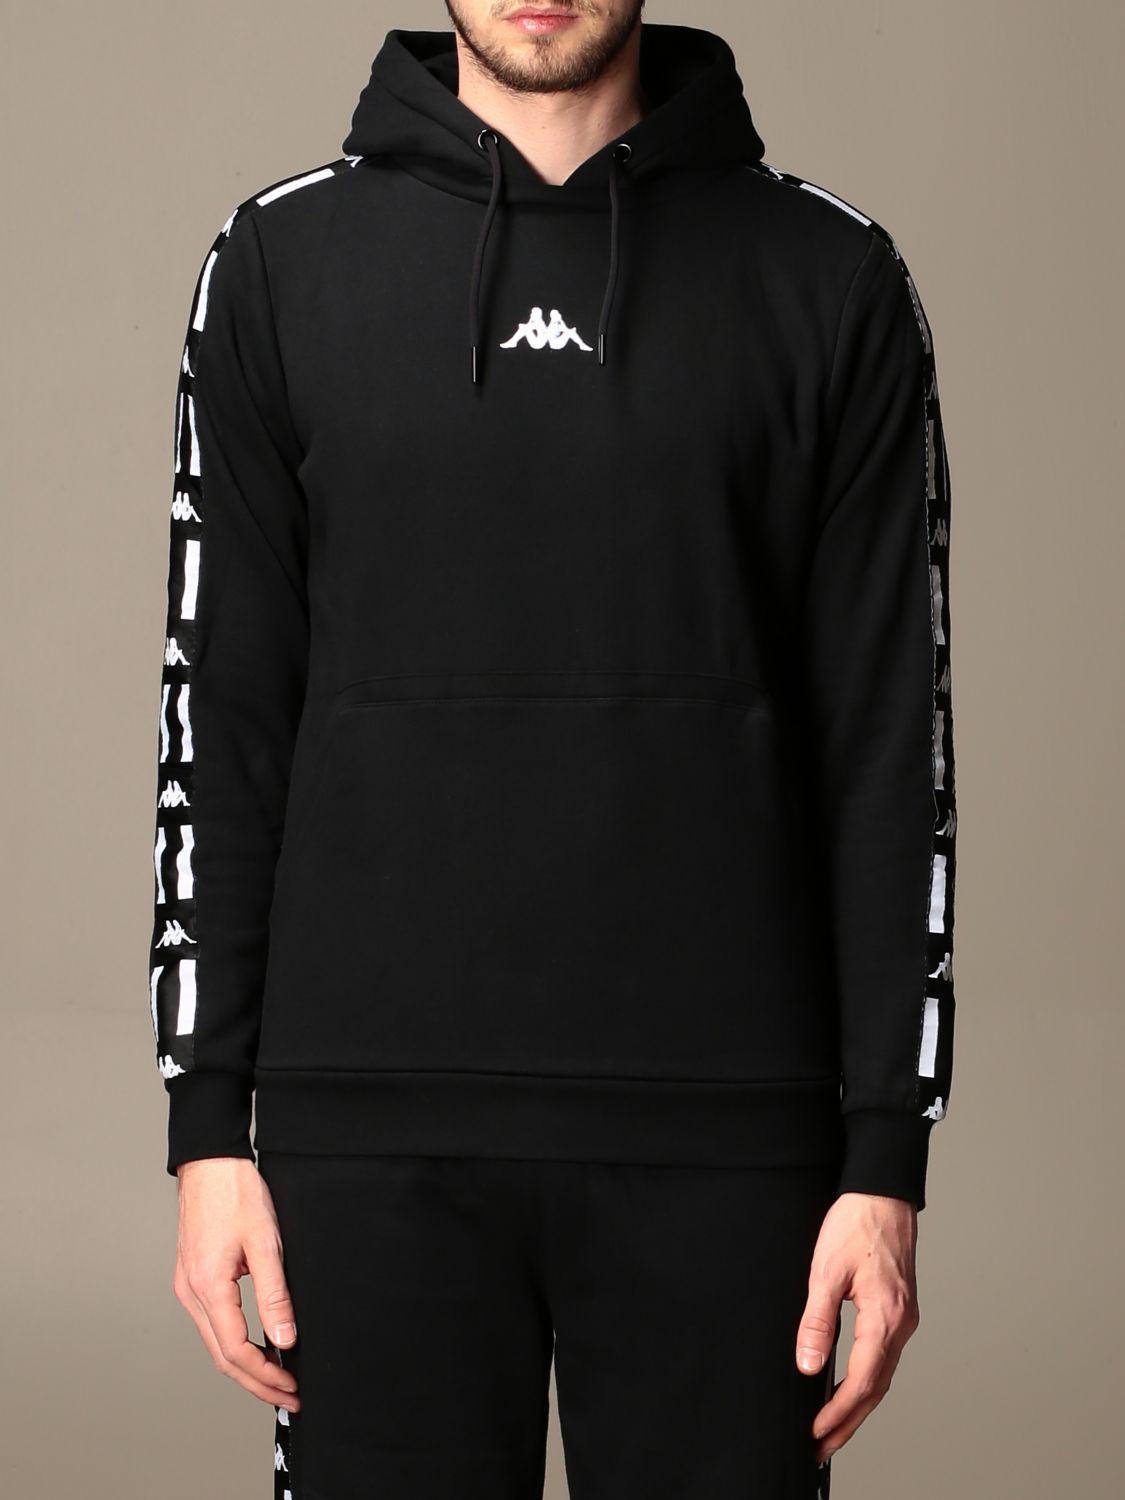 Kappa Outlet: Authentic USA hoodie with logo - Black | Kappa sweatshirt 31114LW online GIGLIO.COM